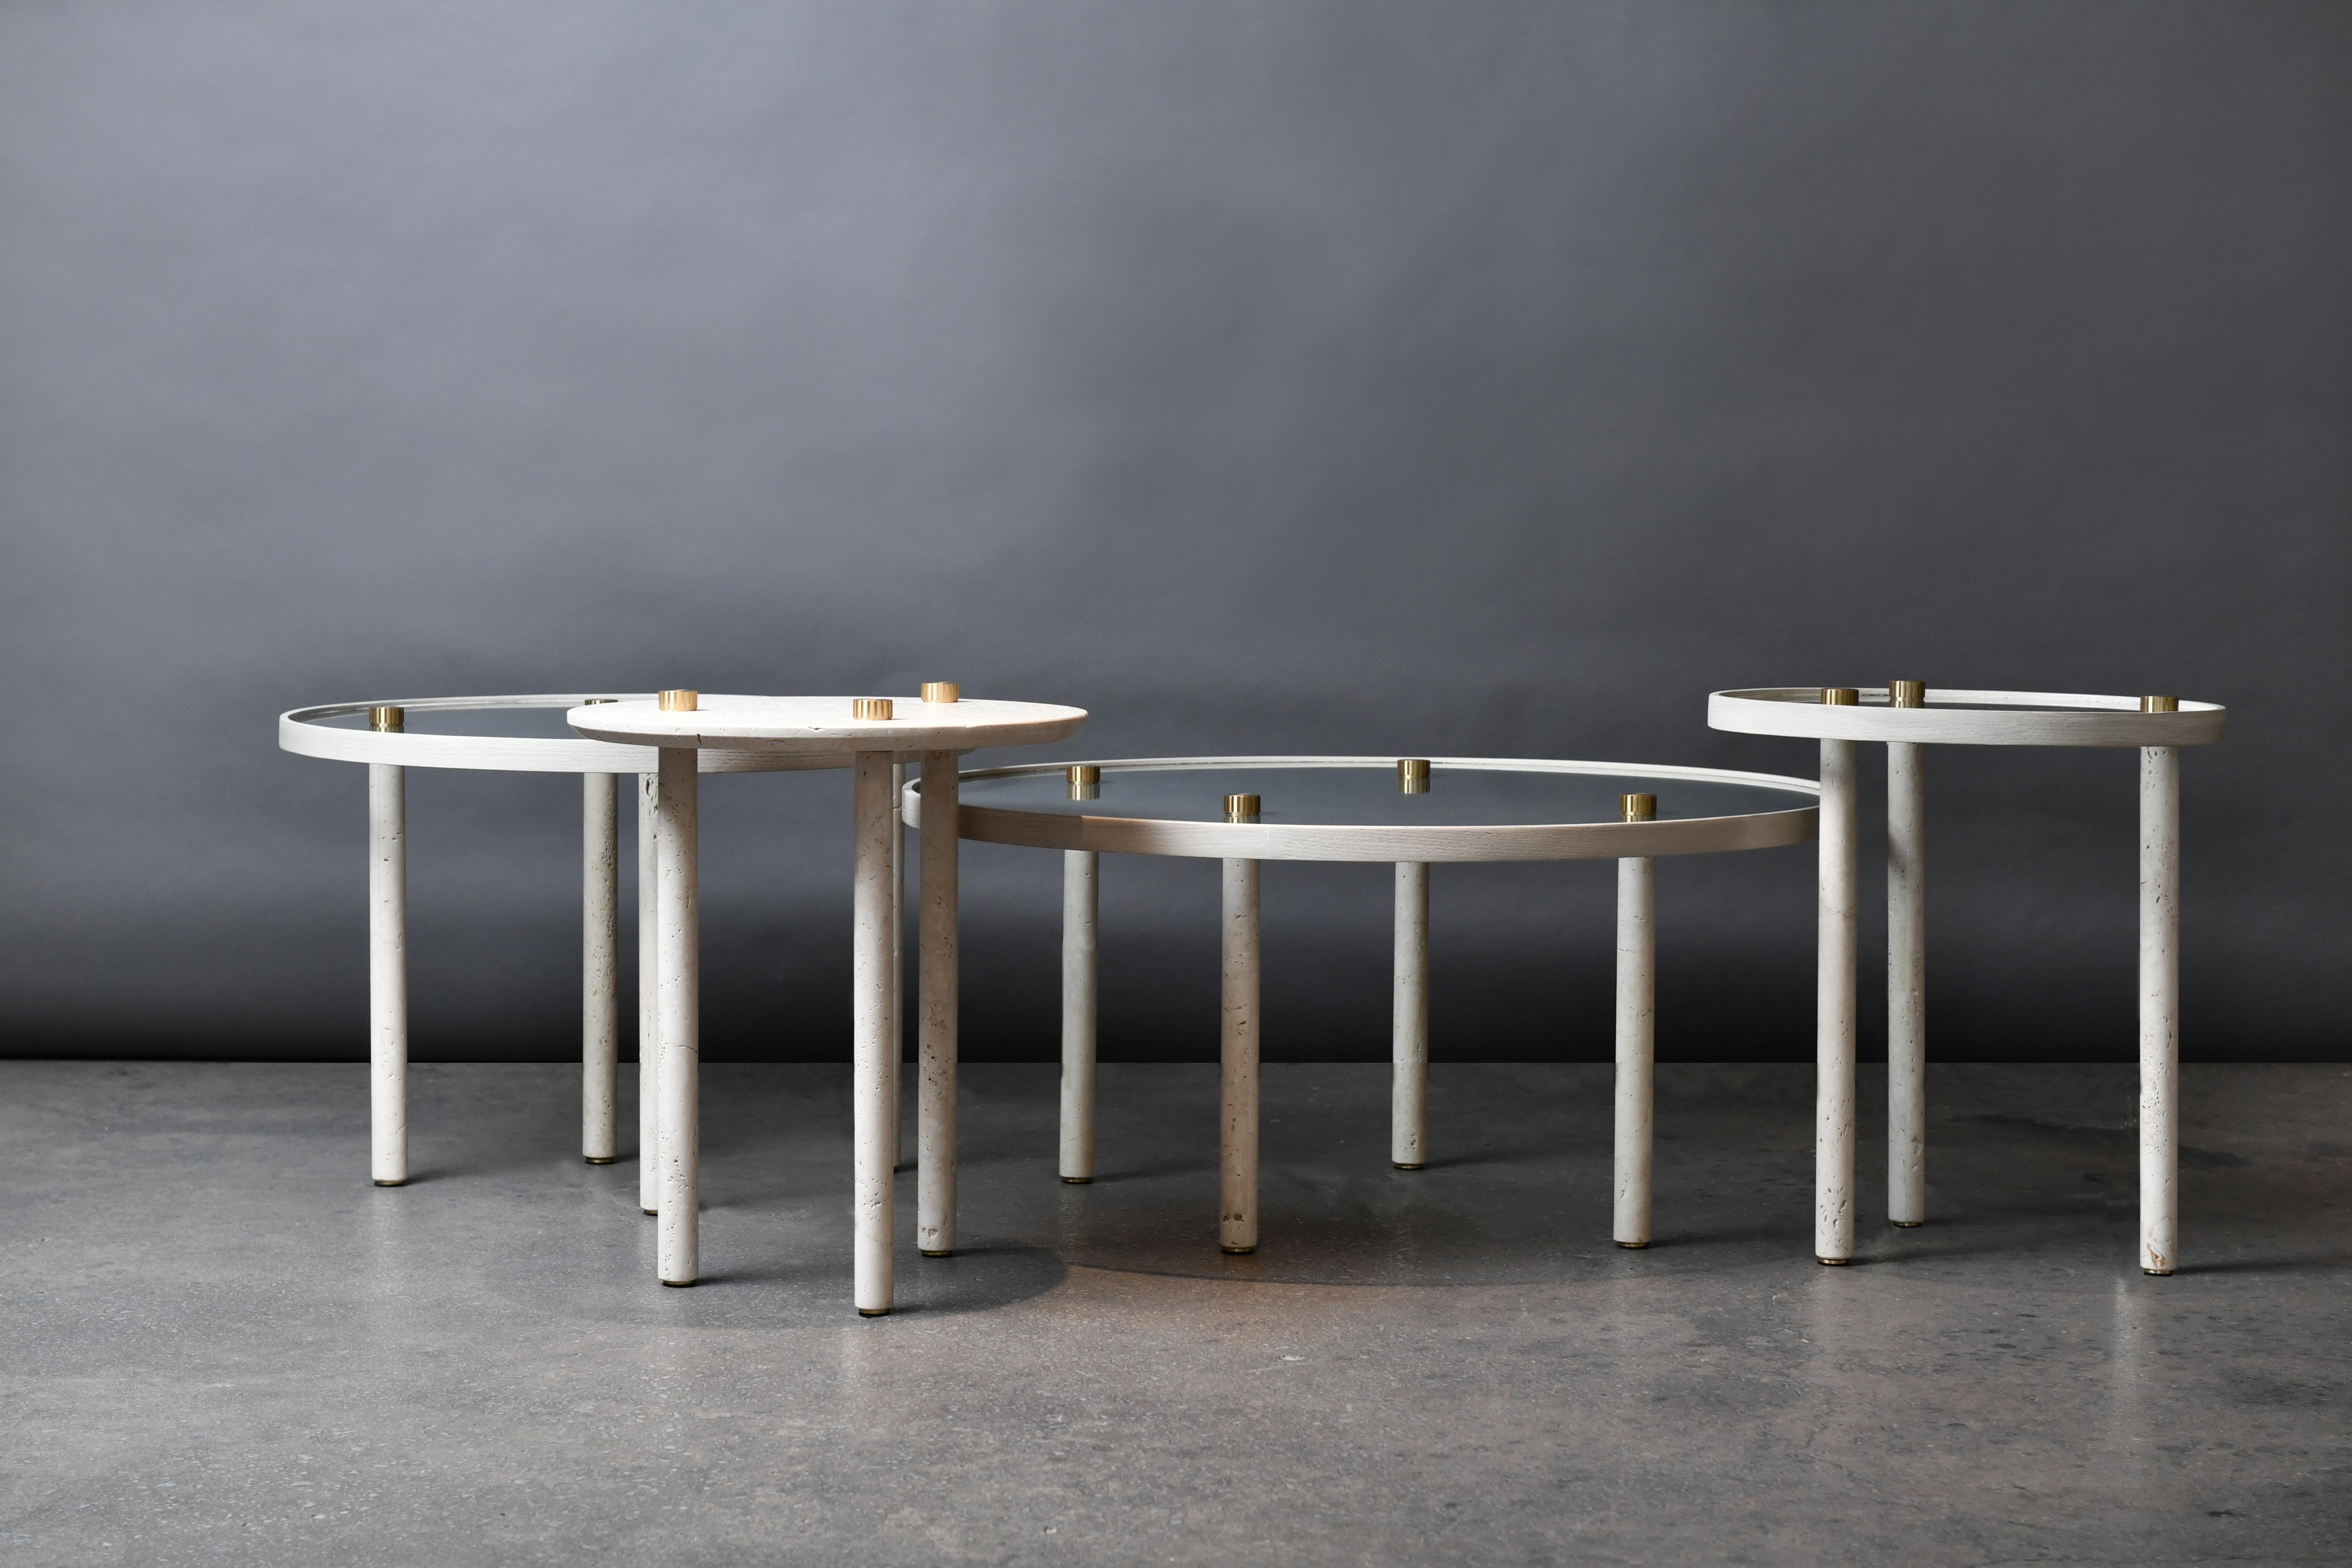 Set fo 4 Nostalgia tables by Saccal Design House
Dimensions: 
TG1: Ø 80cm x H 37cm
TG2: Ø 60cm x H42cm 
TG3: Ø 40cm x H 46cm
TM1: Ø 80cm x H 37cm
Materials: Carrara and brass

Saccal Design House, located in Beirut Lebanon, was founded in